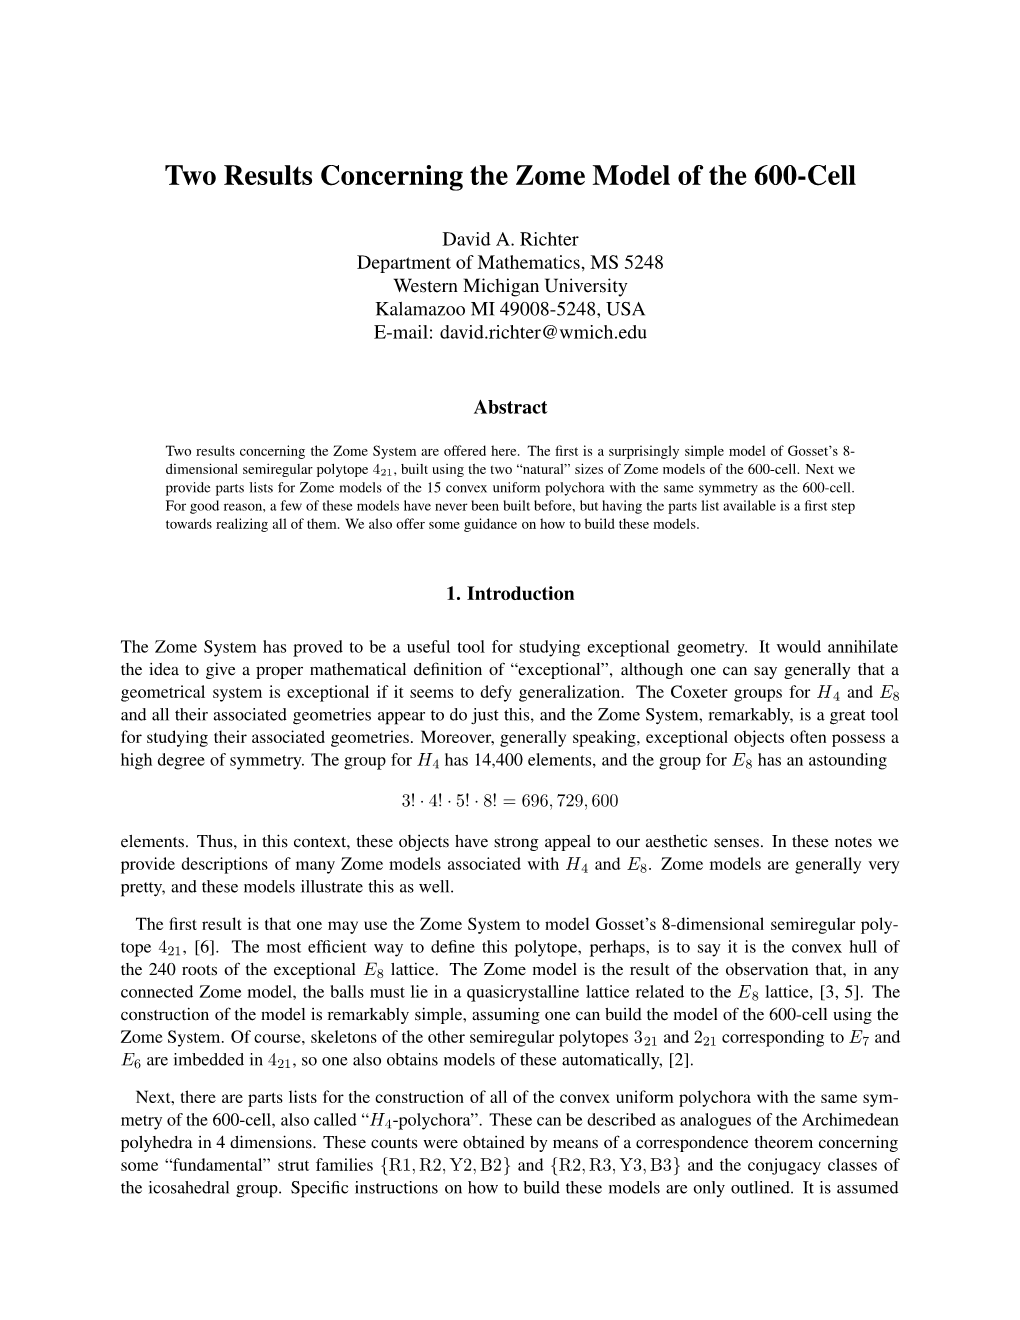 Two Results Concerning the Zome Model of the 600-Cell